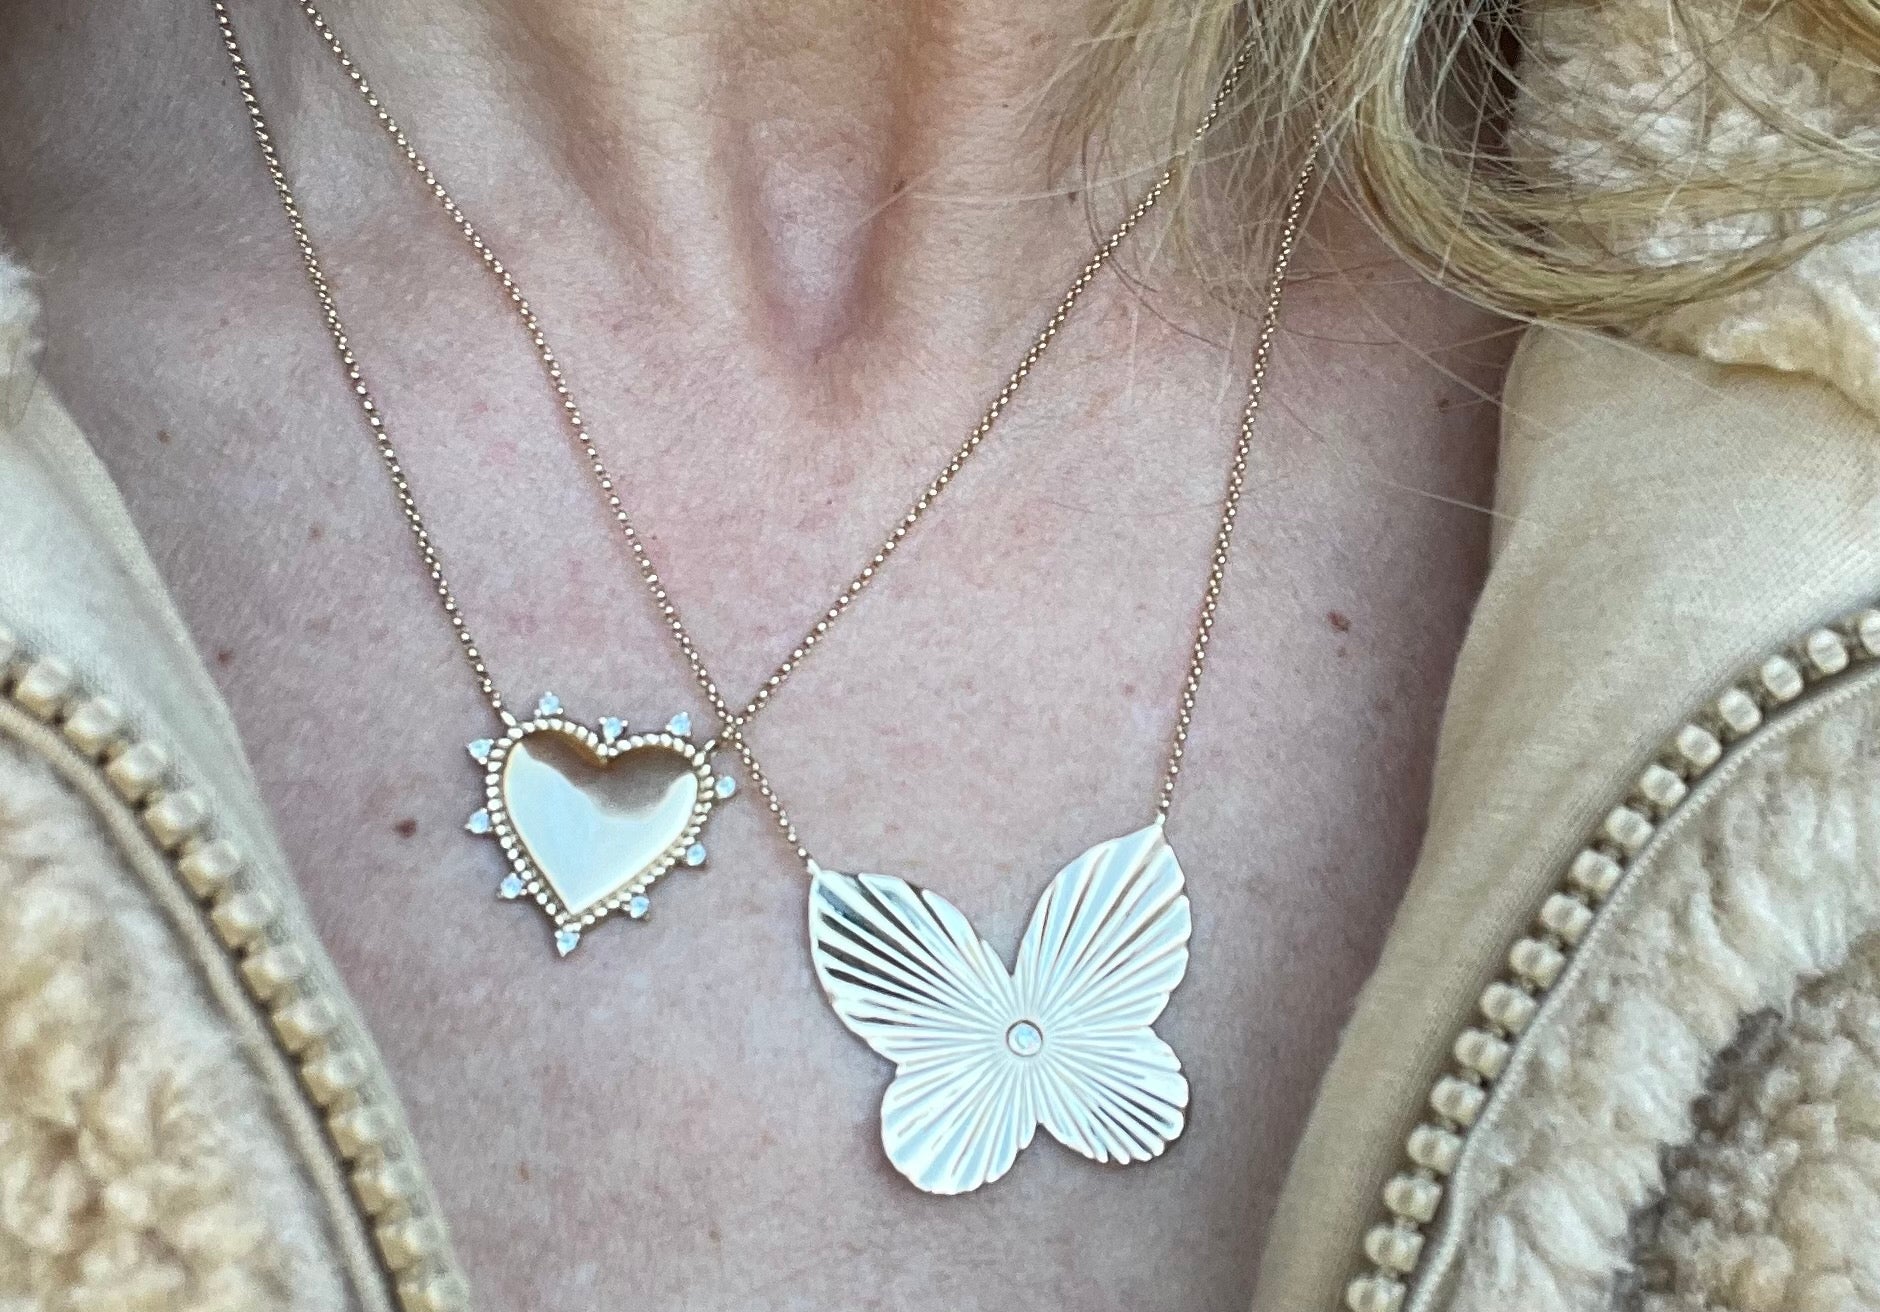 An oversized golden butterfly with just the right amount of sparkle.